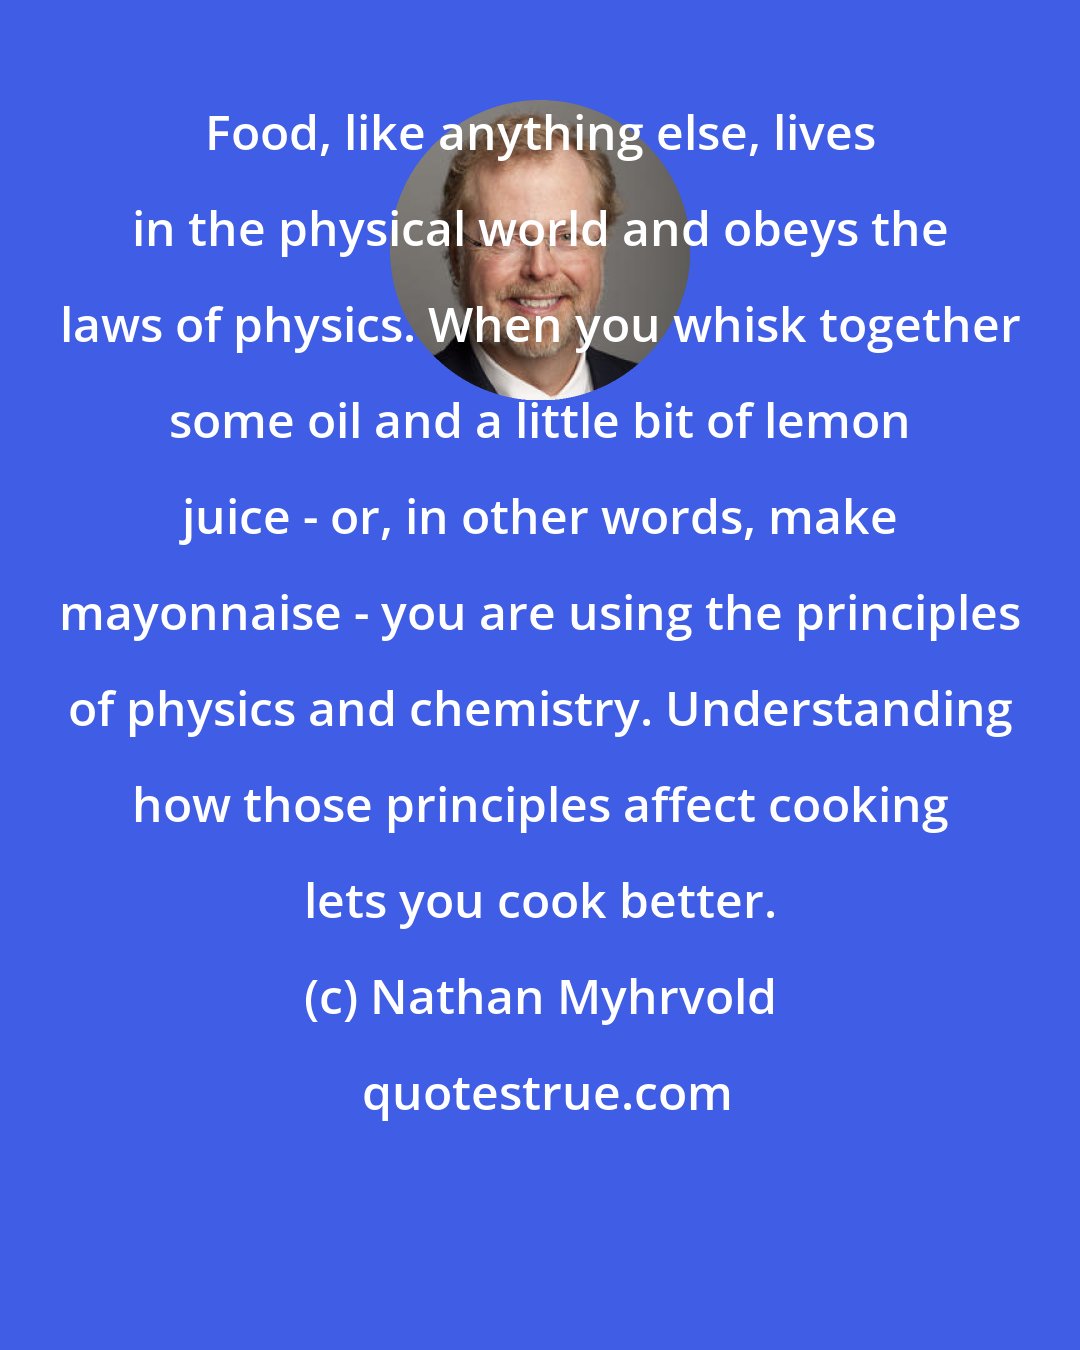 Nathan Myhrvold: Food, like anything else, lives in the physical world and obeys the laws of physics. When you whisk together some oil and a little bit of lemon juice - or, in other words, make mayonnaise - you are using the principles of physics and chemistry. Understanding how those principles affect cooking lets you cook better.